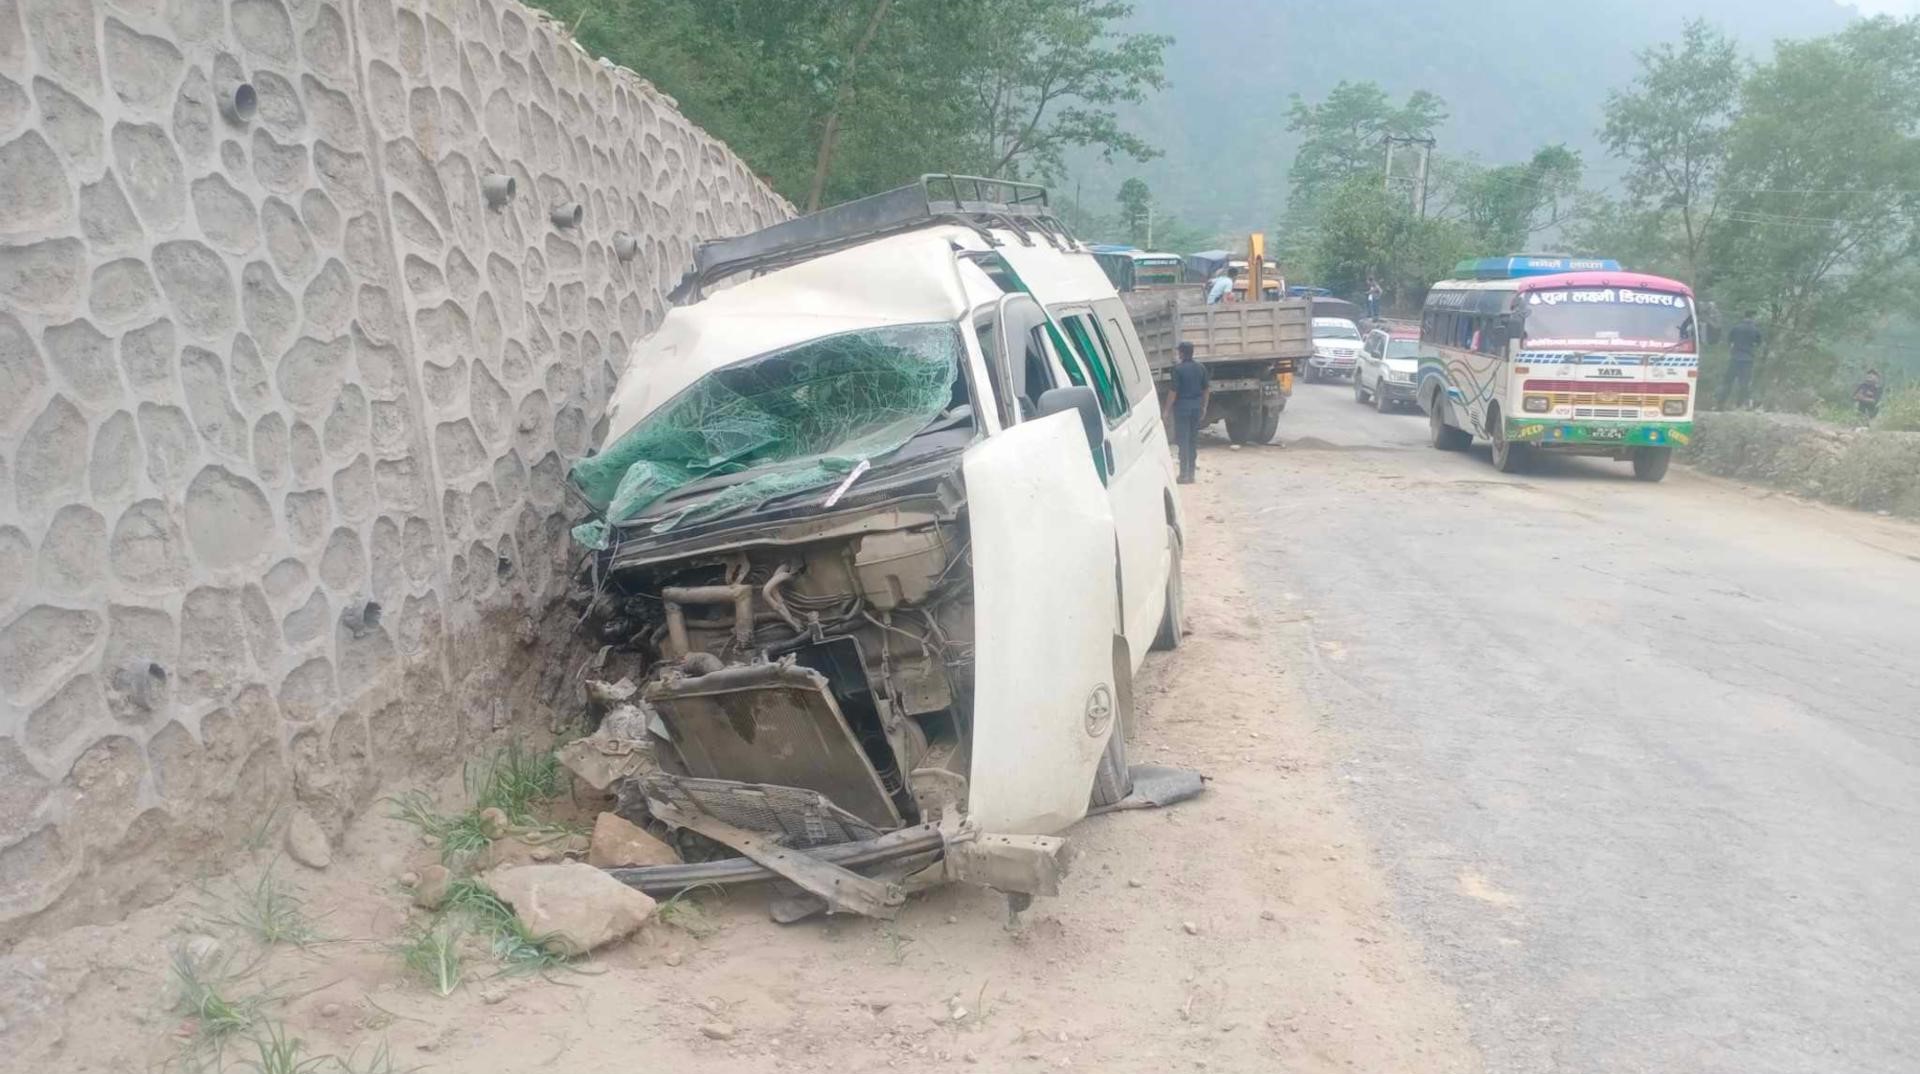 Microbus collides with tipper, 13 seriously injured